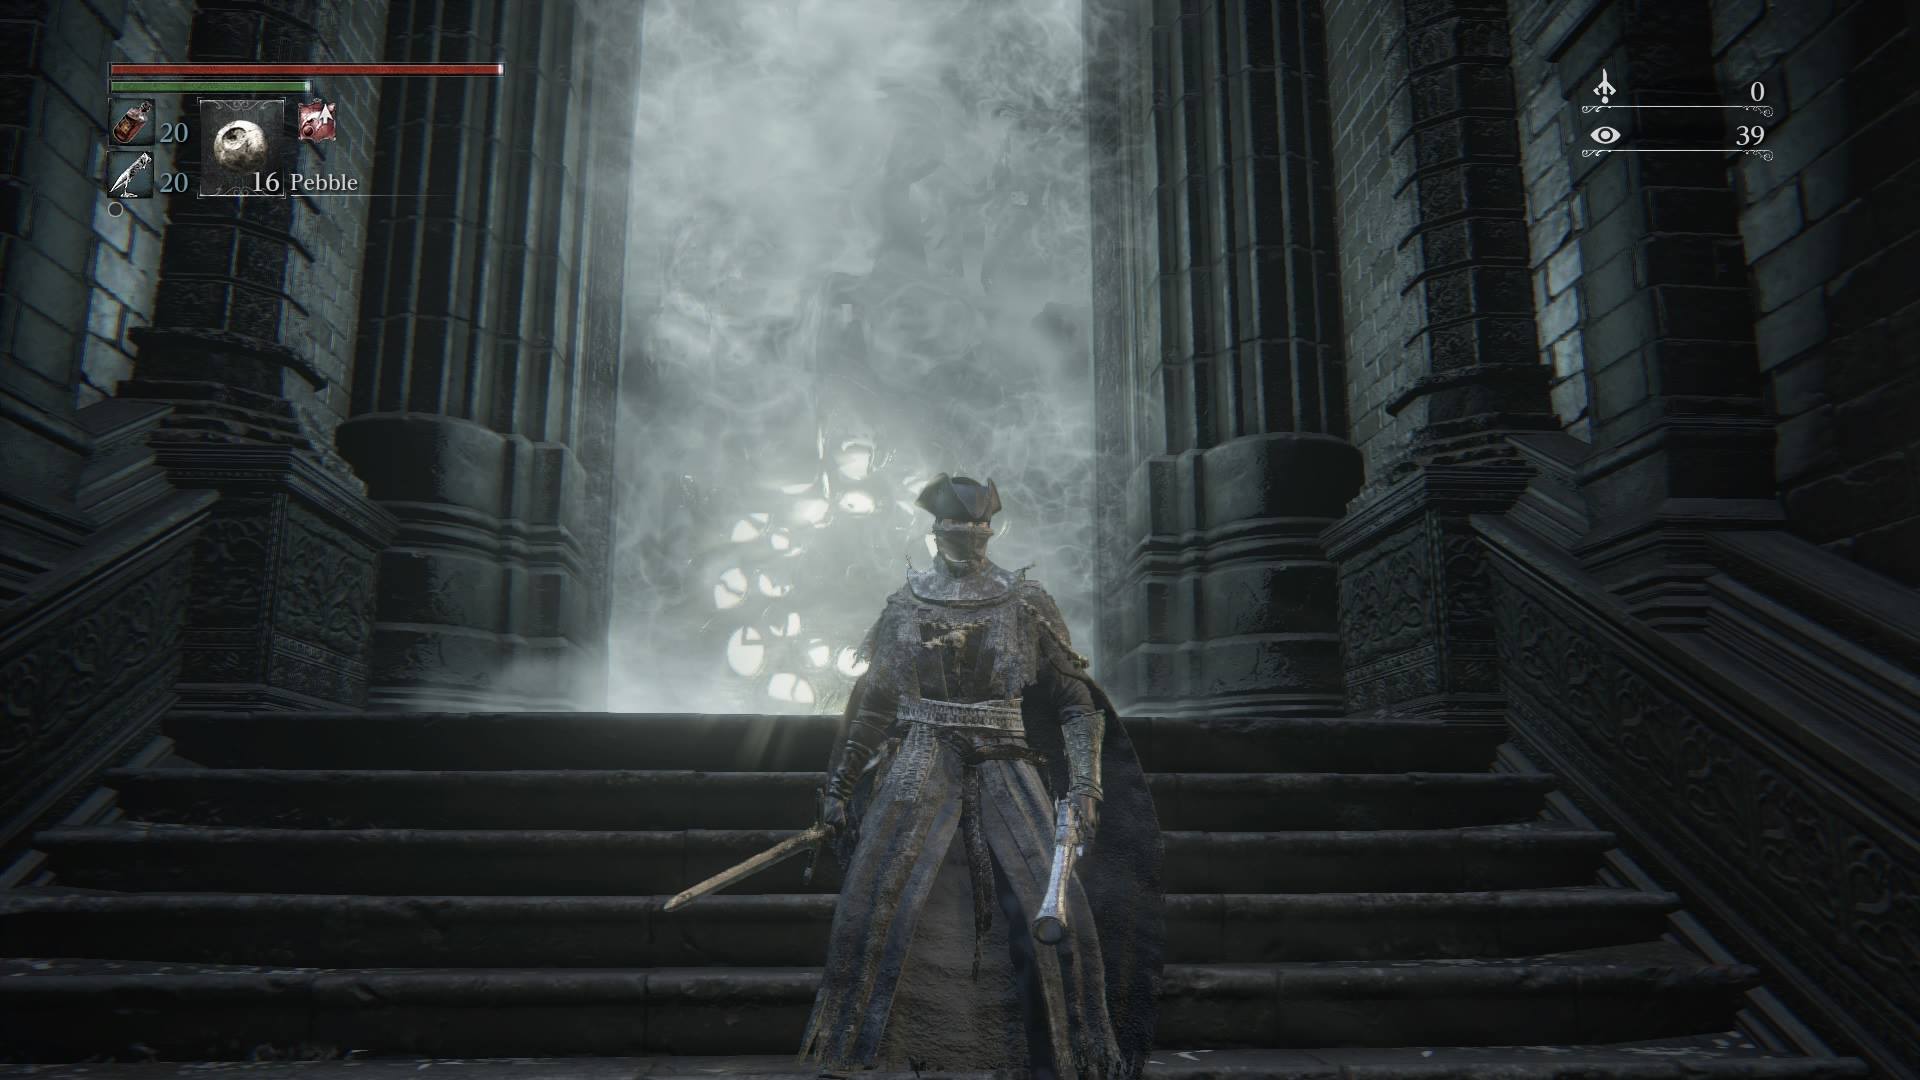 How to Git Gud at Bloodborne